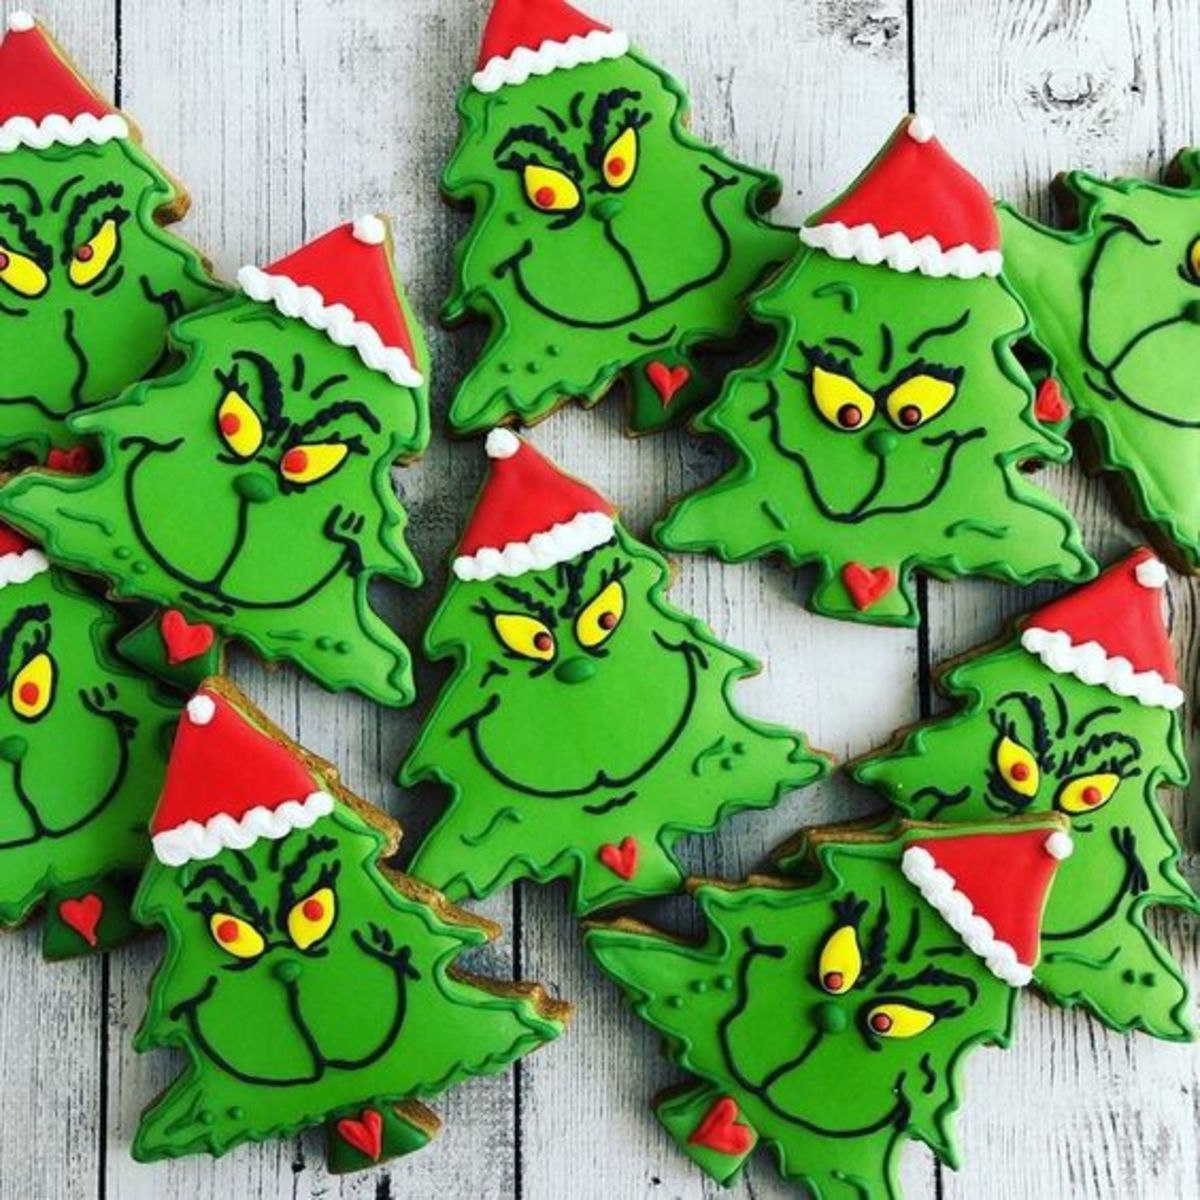 60+ Easy Grinch Christmas Decor and Party Ideas